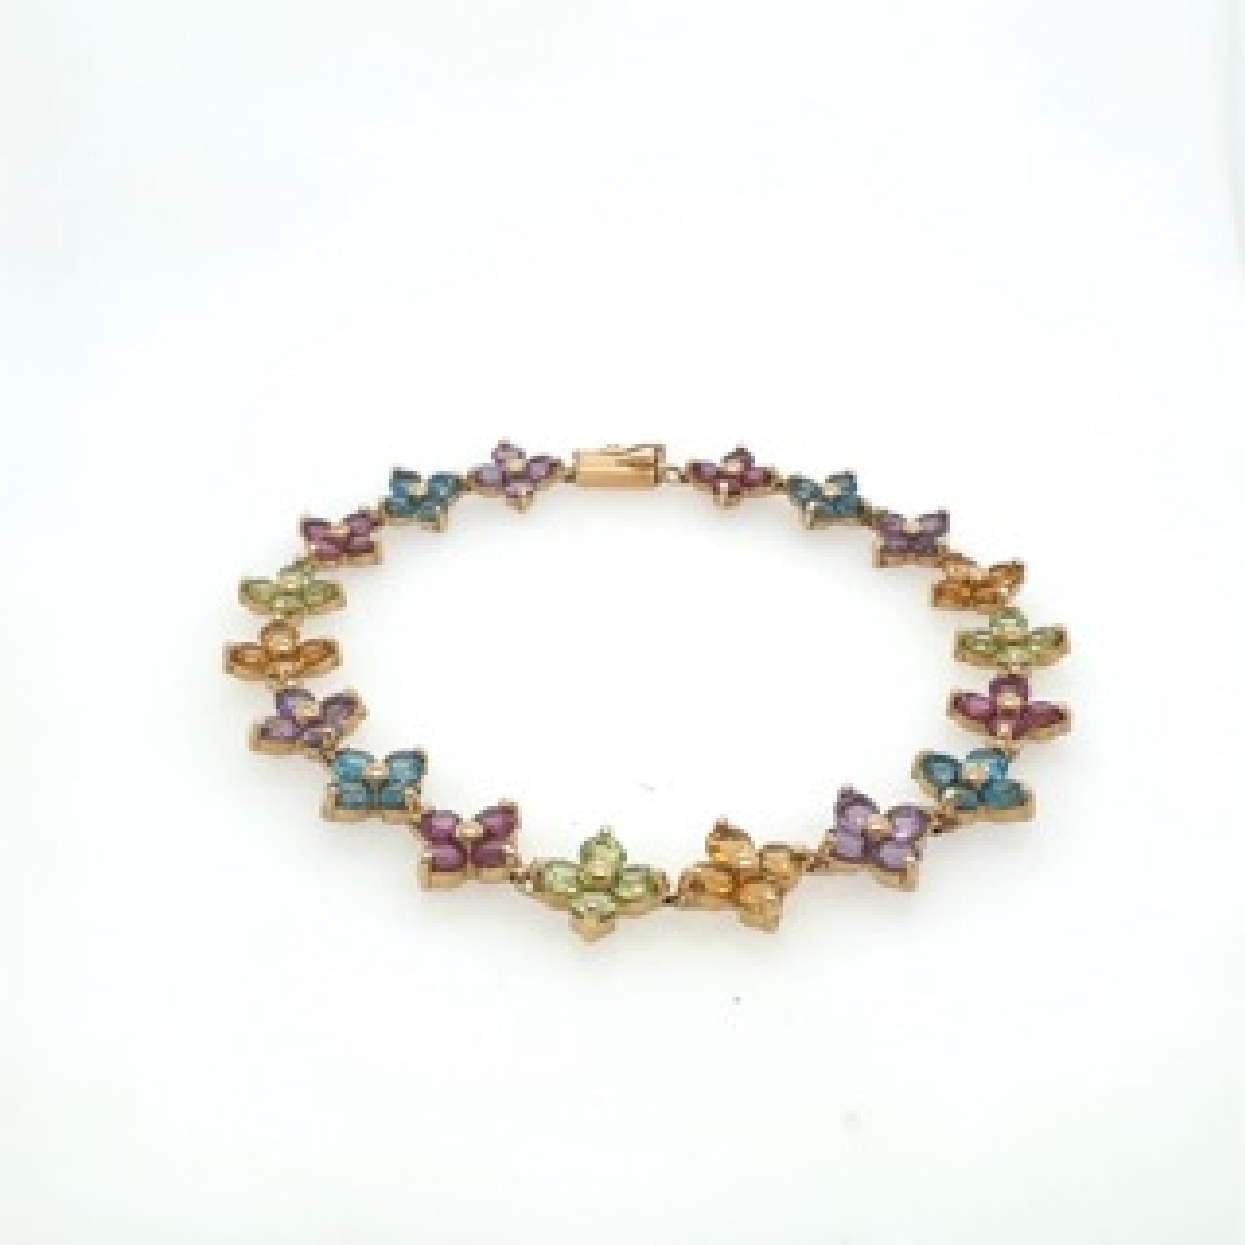 14K Yellow Gold Bracelet with Multi-Color Gemstones in Floral Details

7 Inches